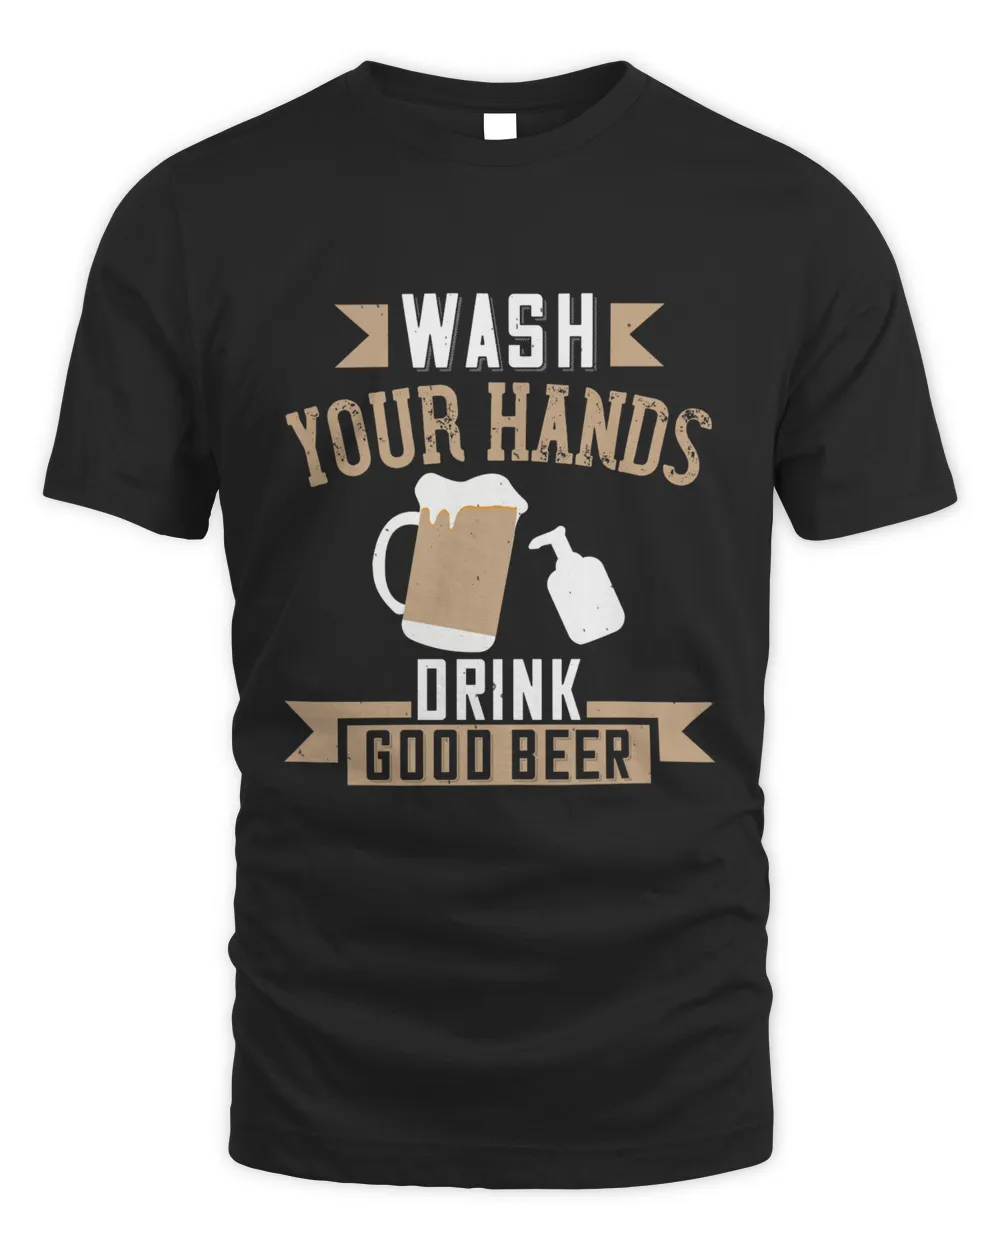 Wash Your Hands Drink Good Beer Beer Shirt For Beer Lover With Free Shipping, Great Gift For Fathers Day